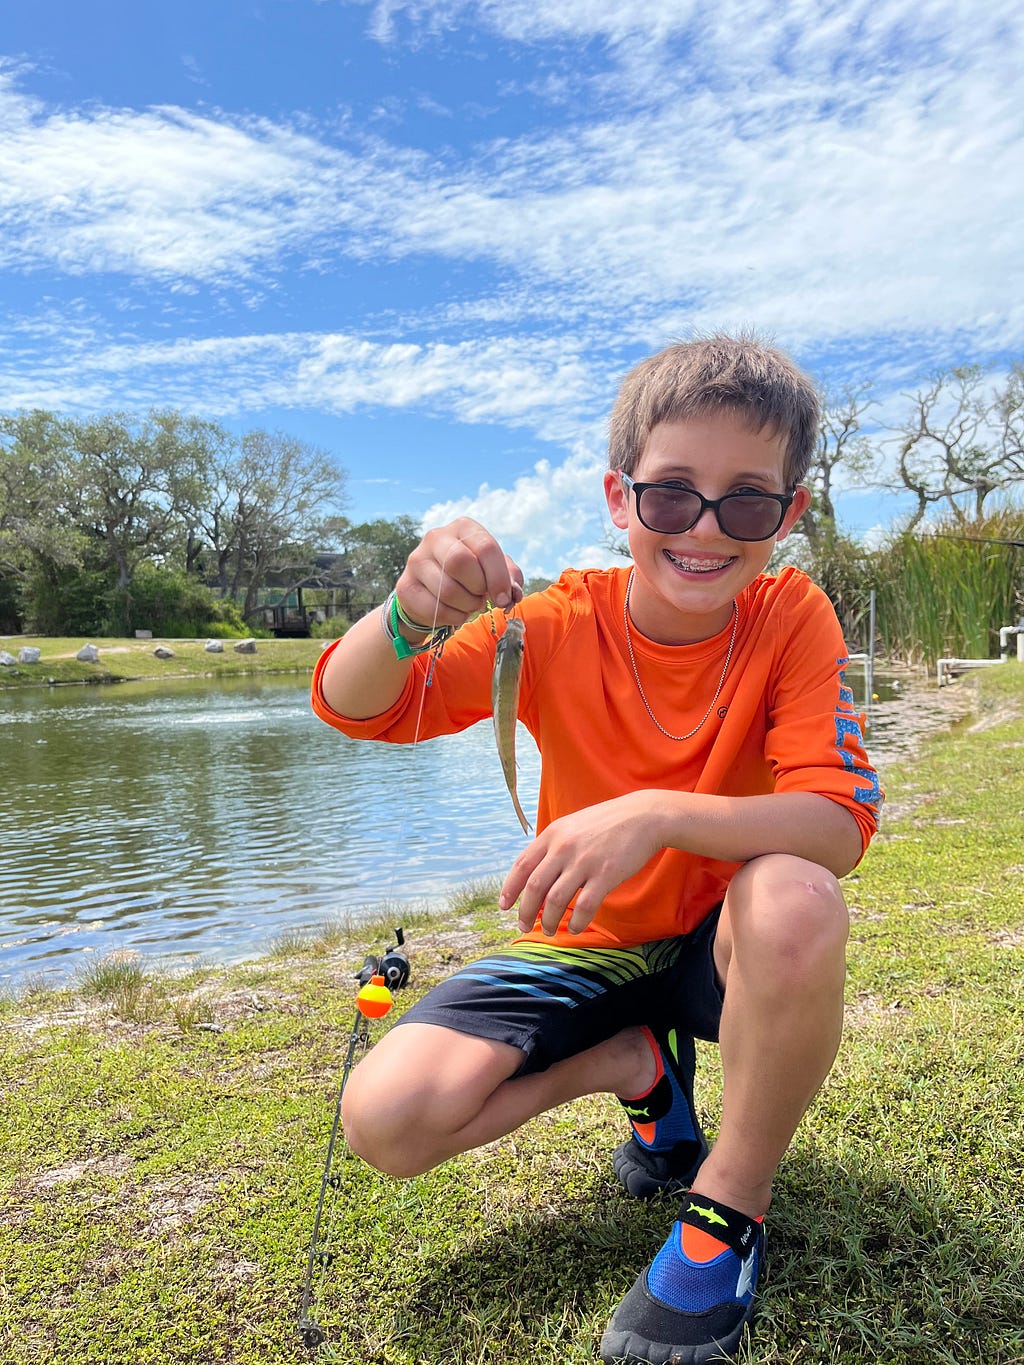 camper holds up fish that he caught at the fishing pond and smiles at camera